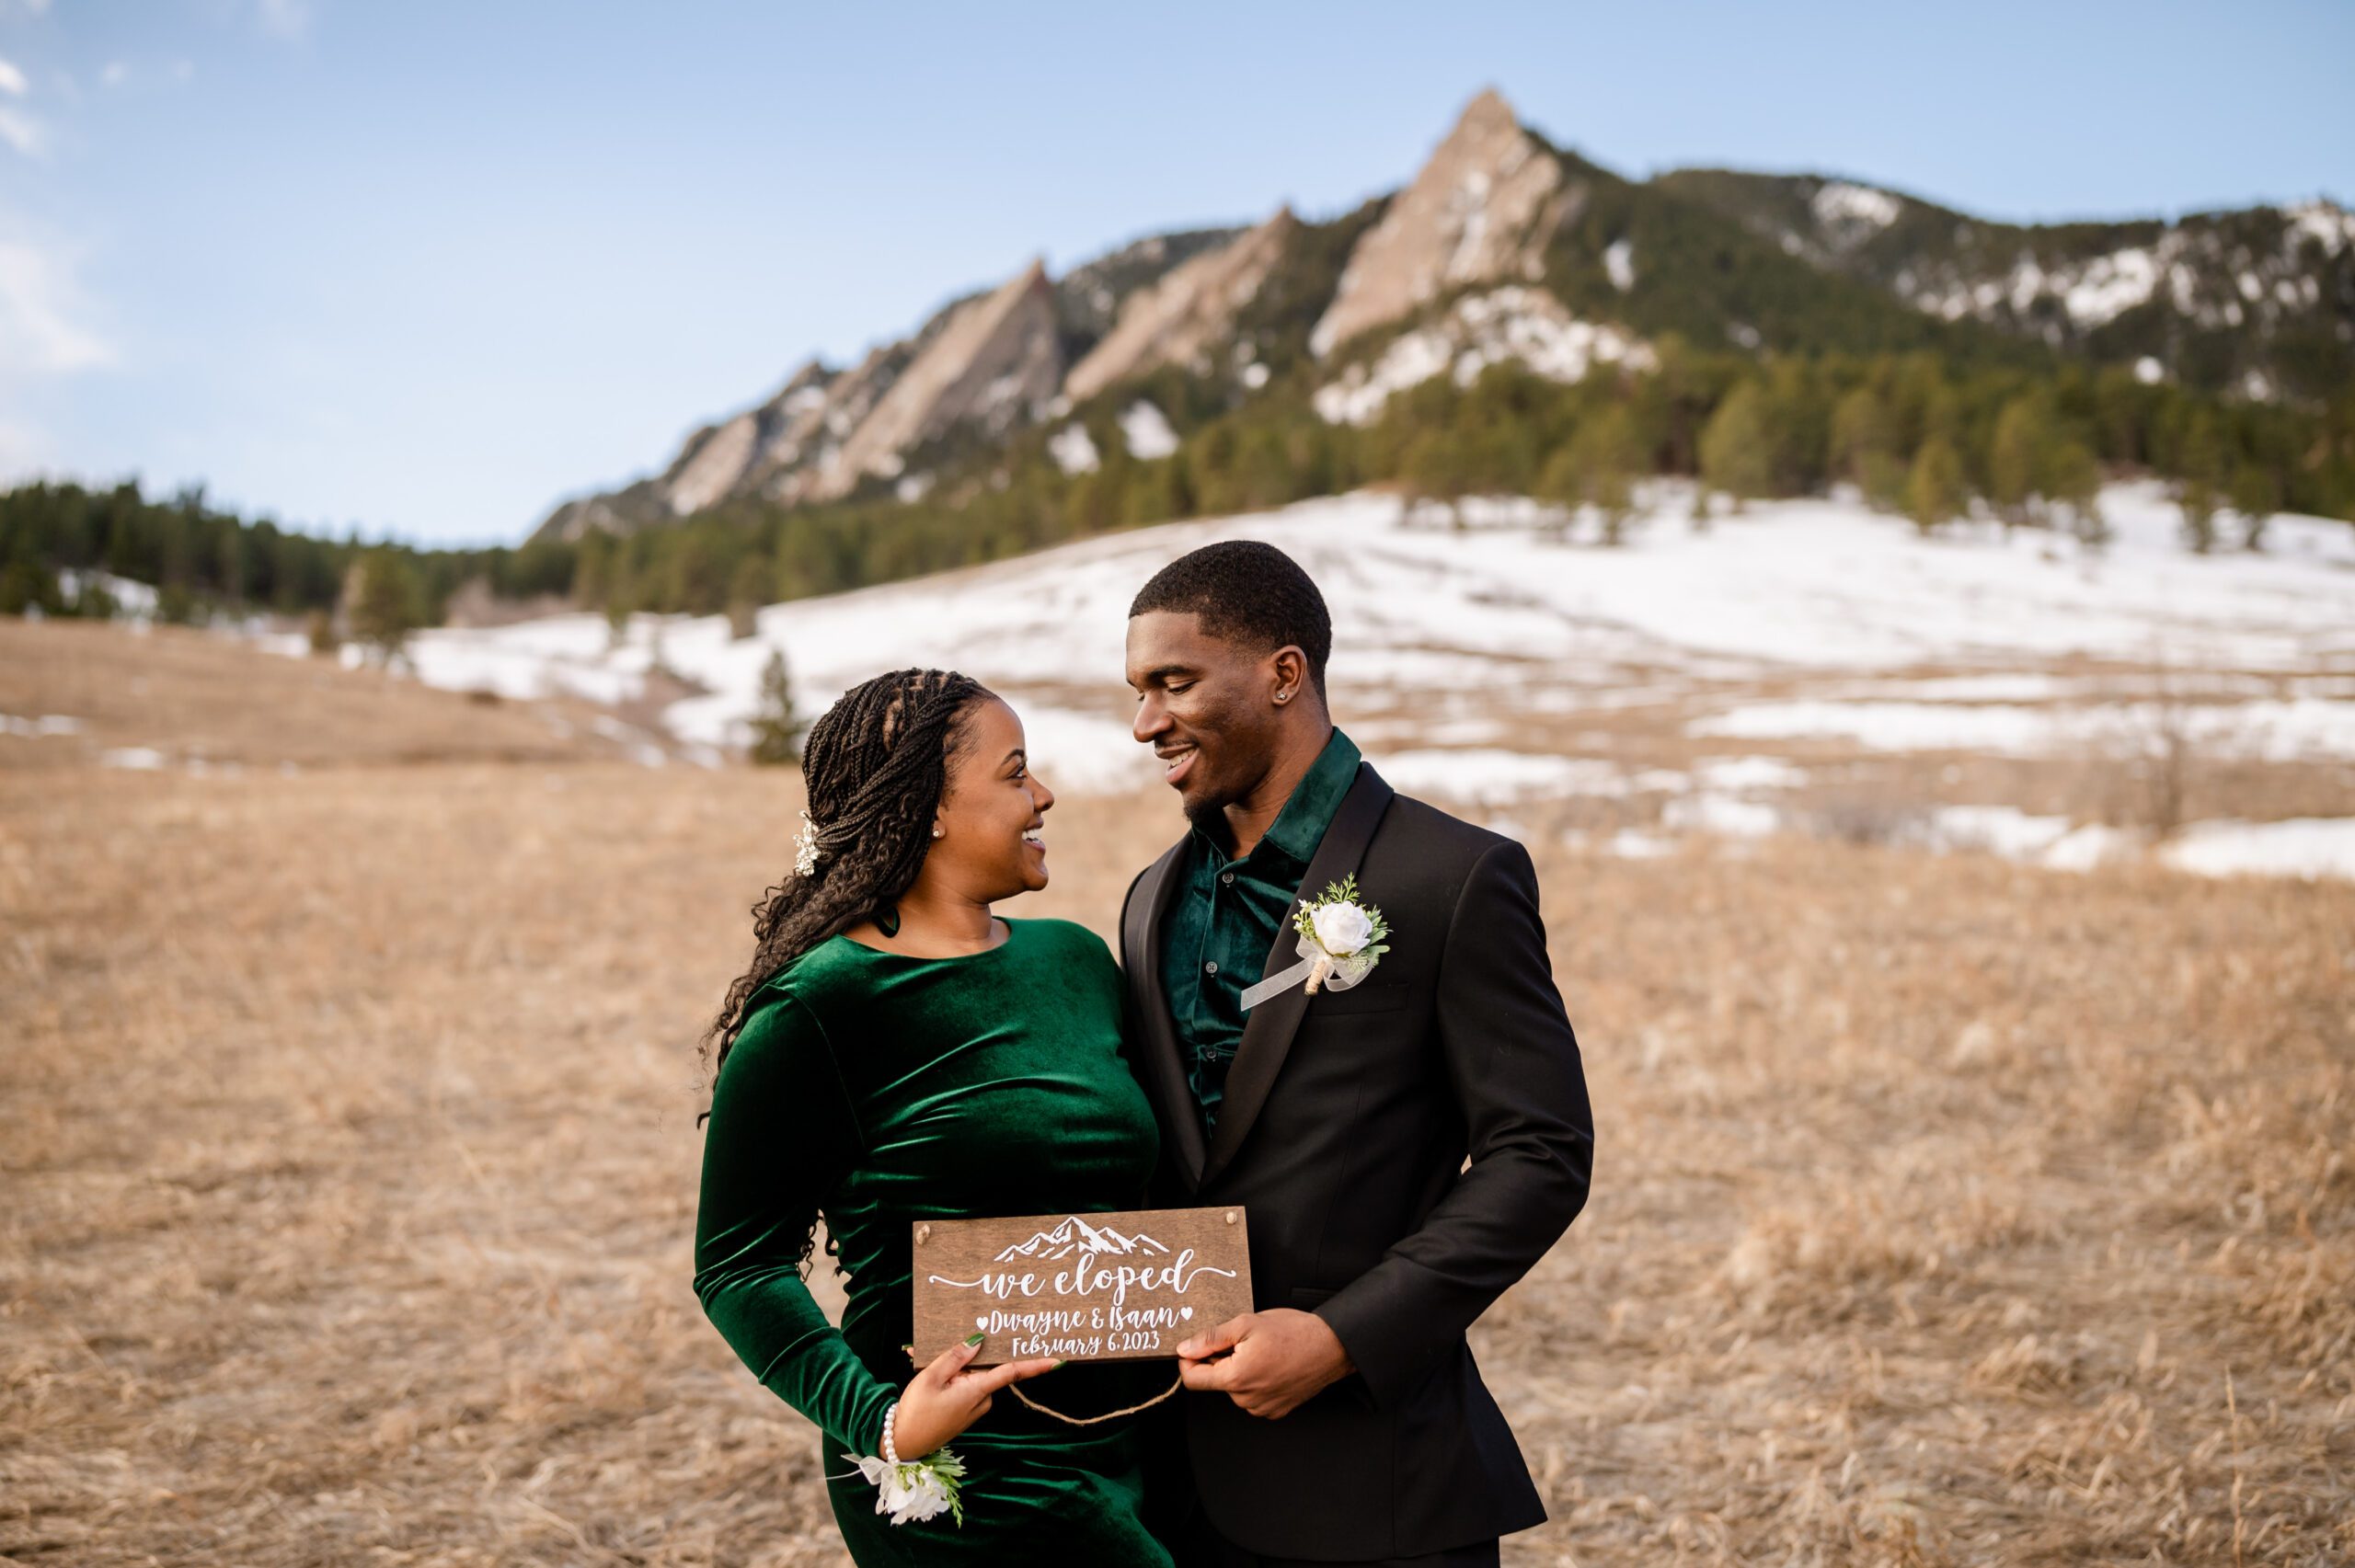 bride and groom hold a "we eloped" sign and look at each other after their Chautauqua Trail elopement.